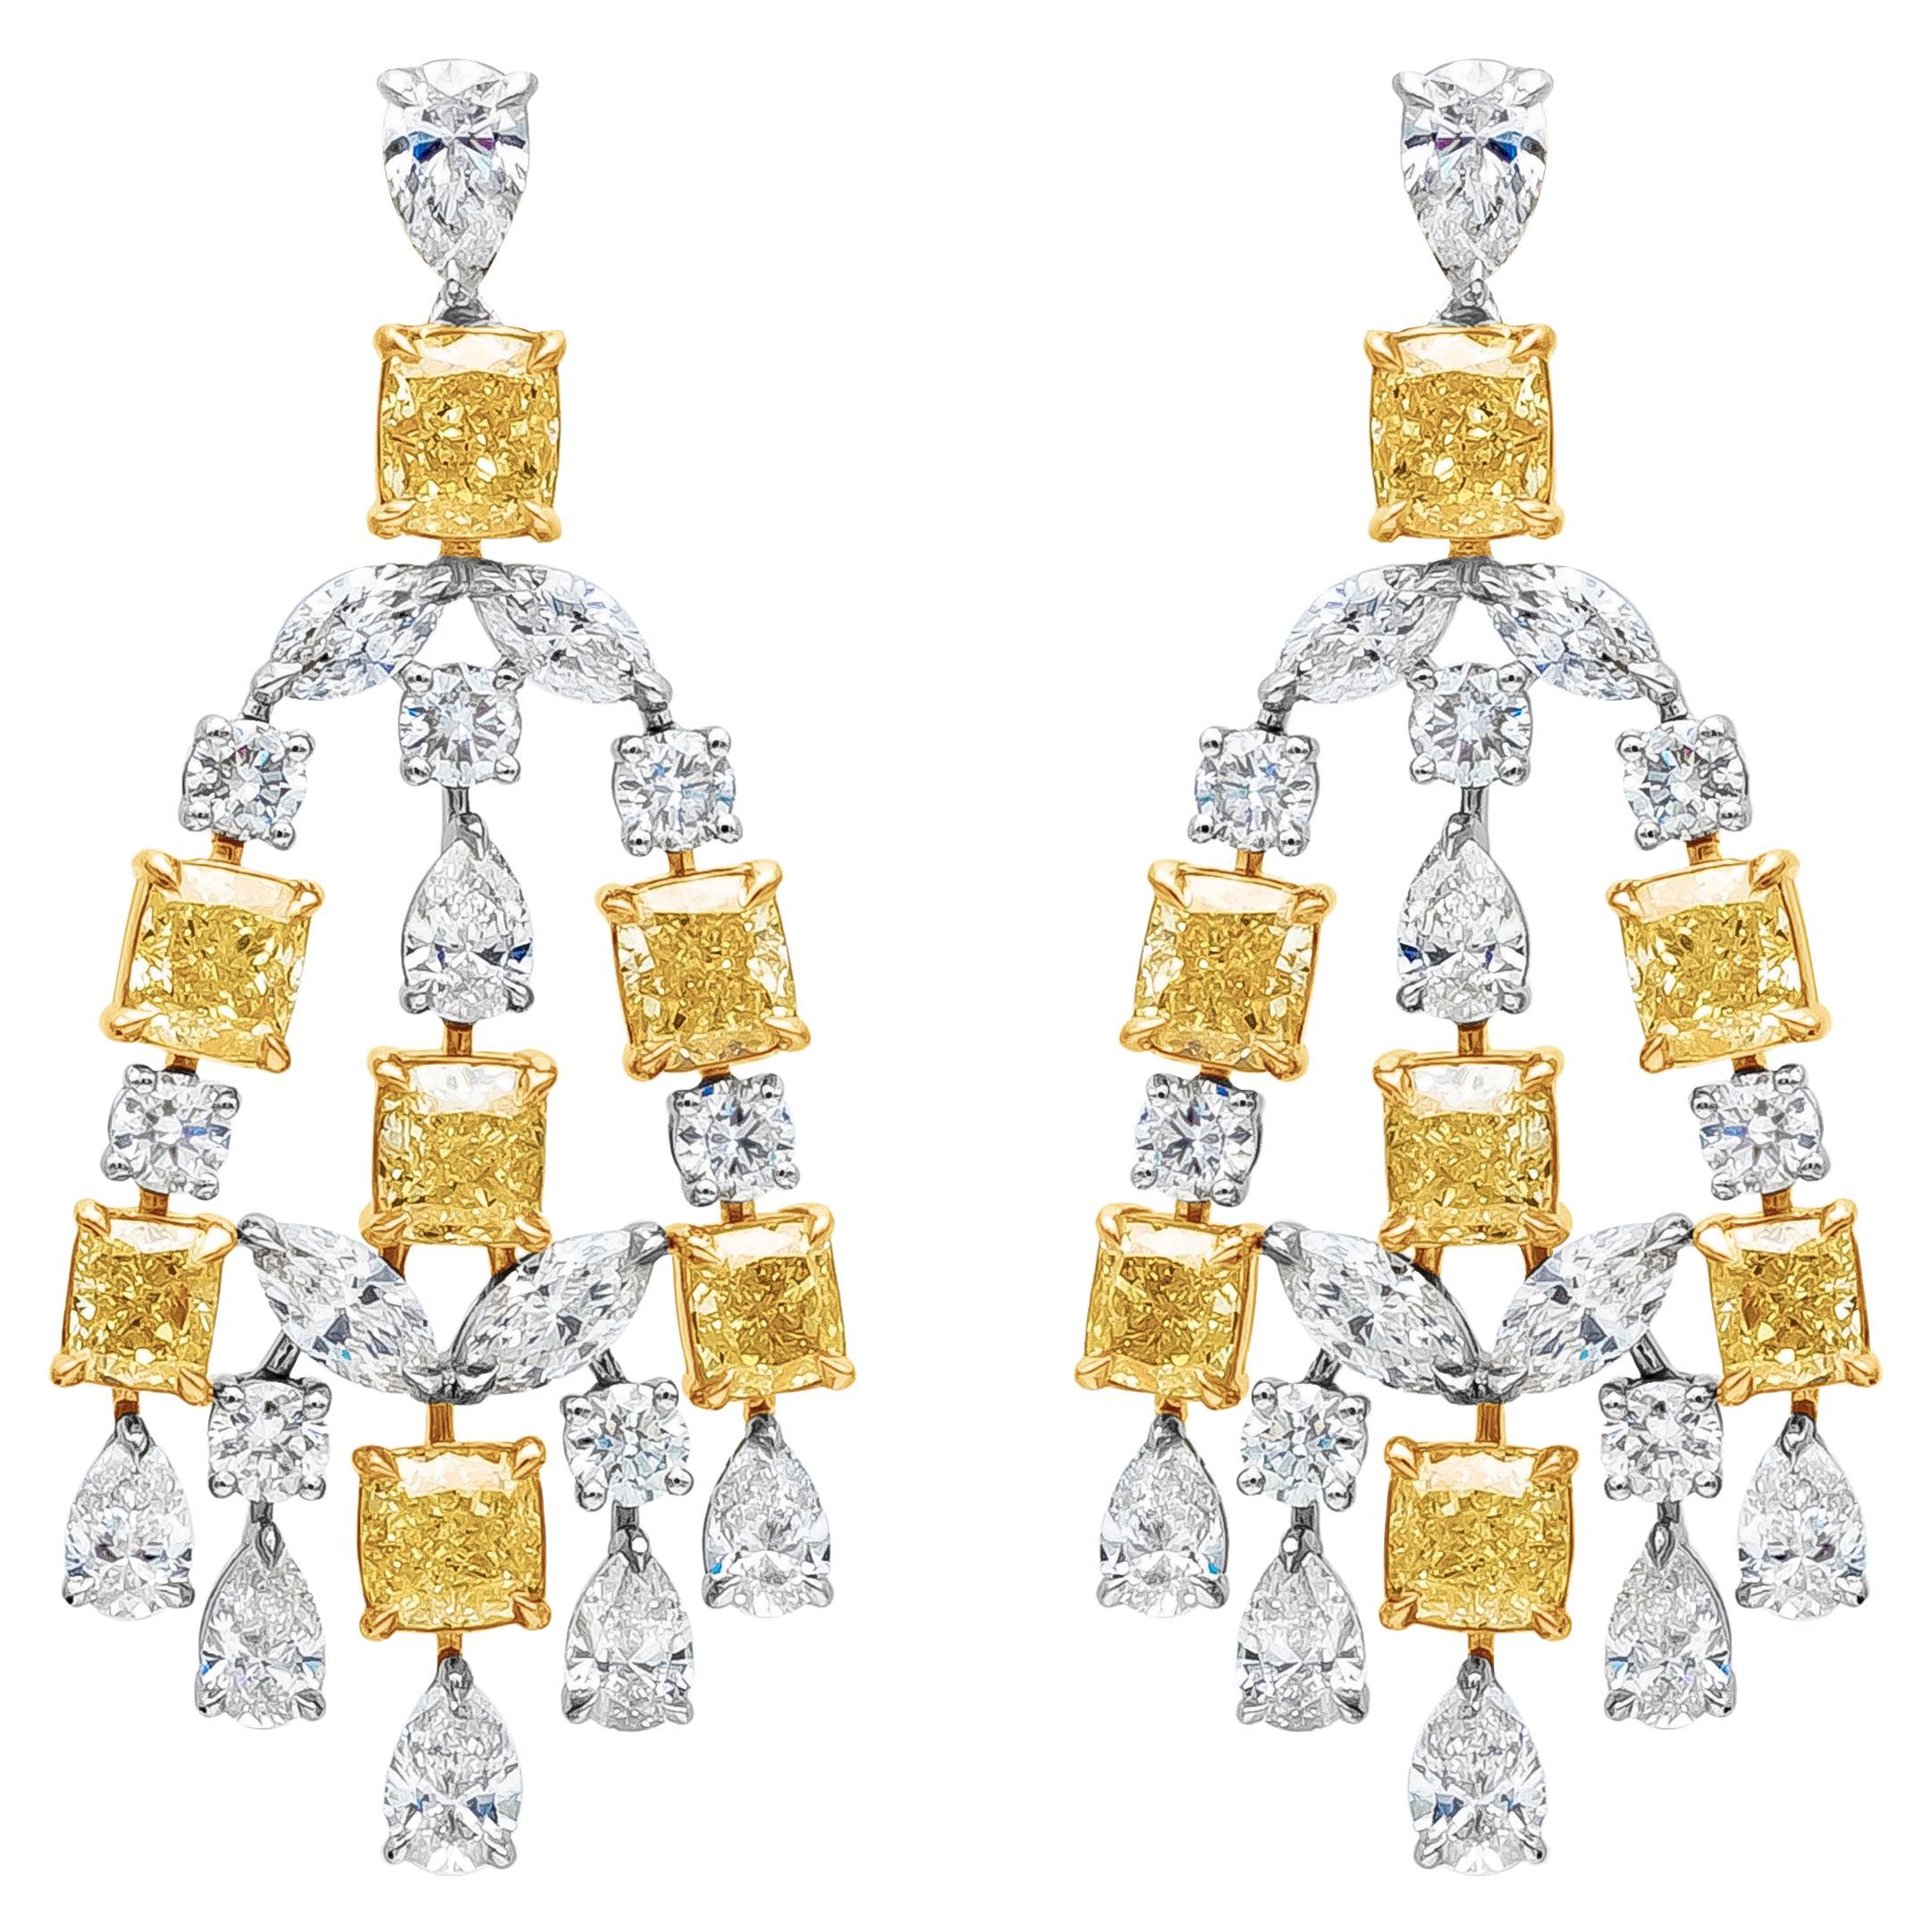 16.56 Carat Total Mixed Cut Fancy Yellow and White Diamond Chandelier Earrings